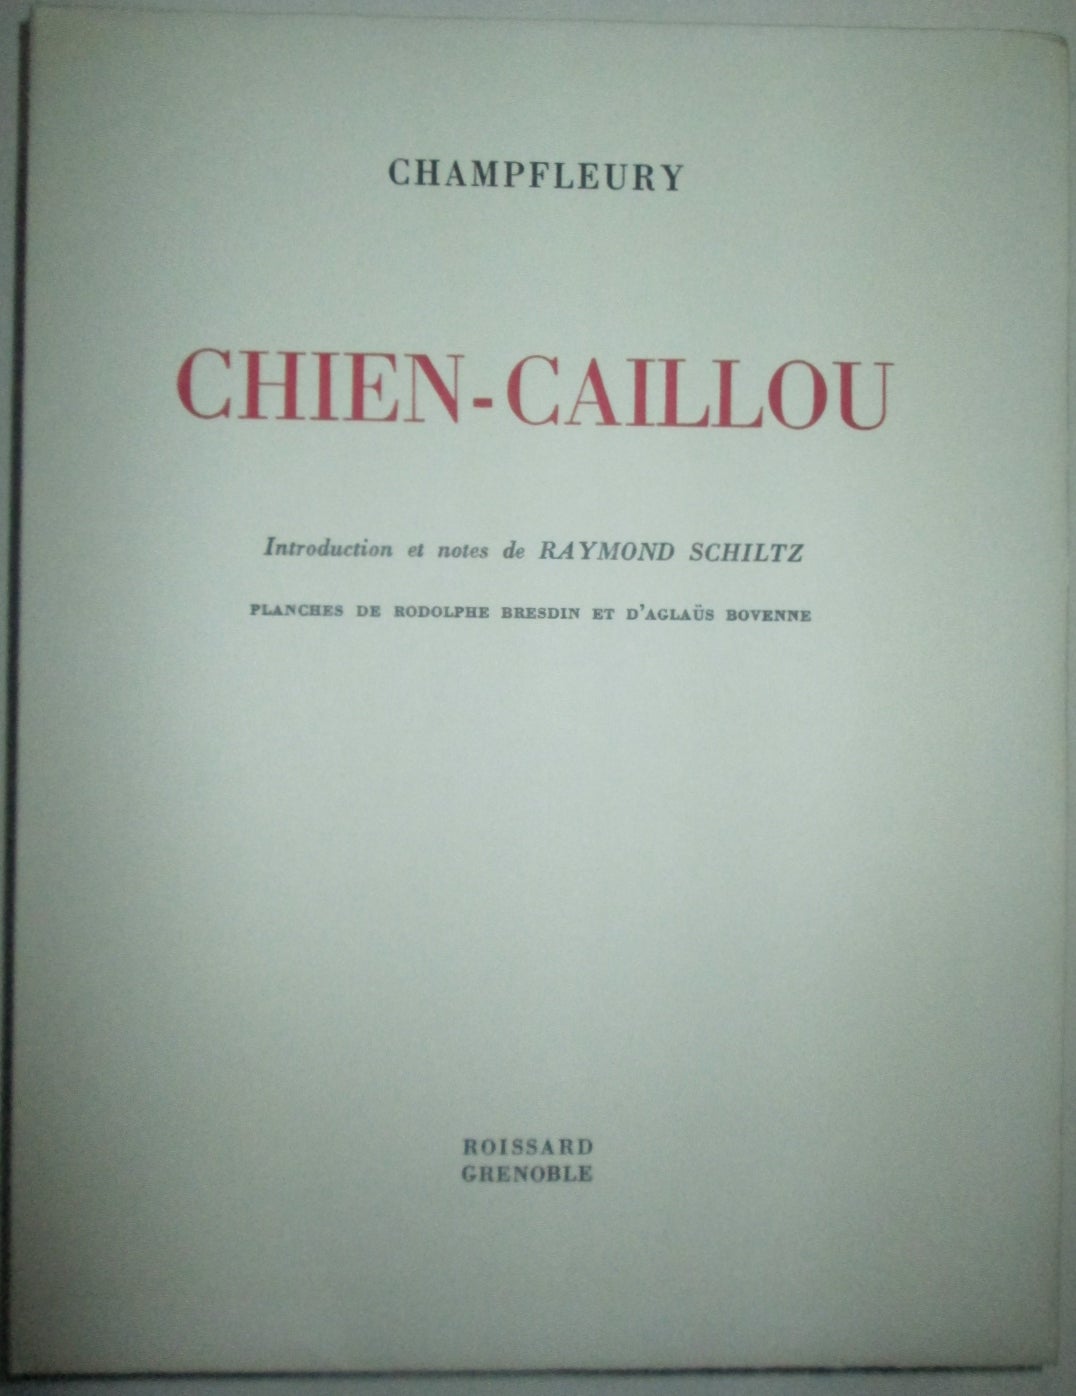 Chien-Caillou by Champfleury on Mare Booksellers